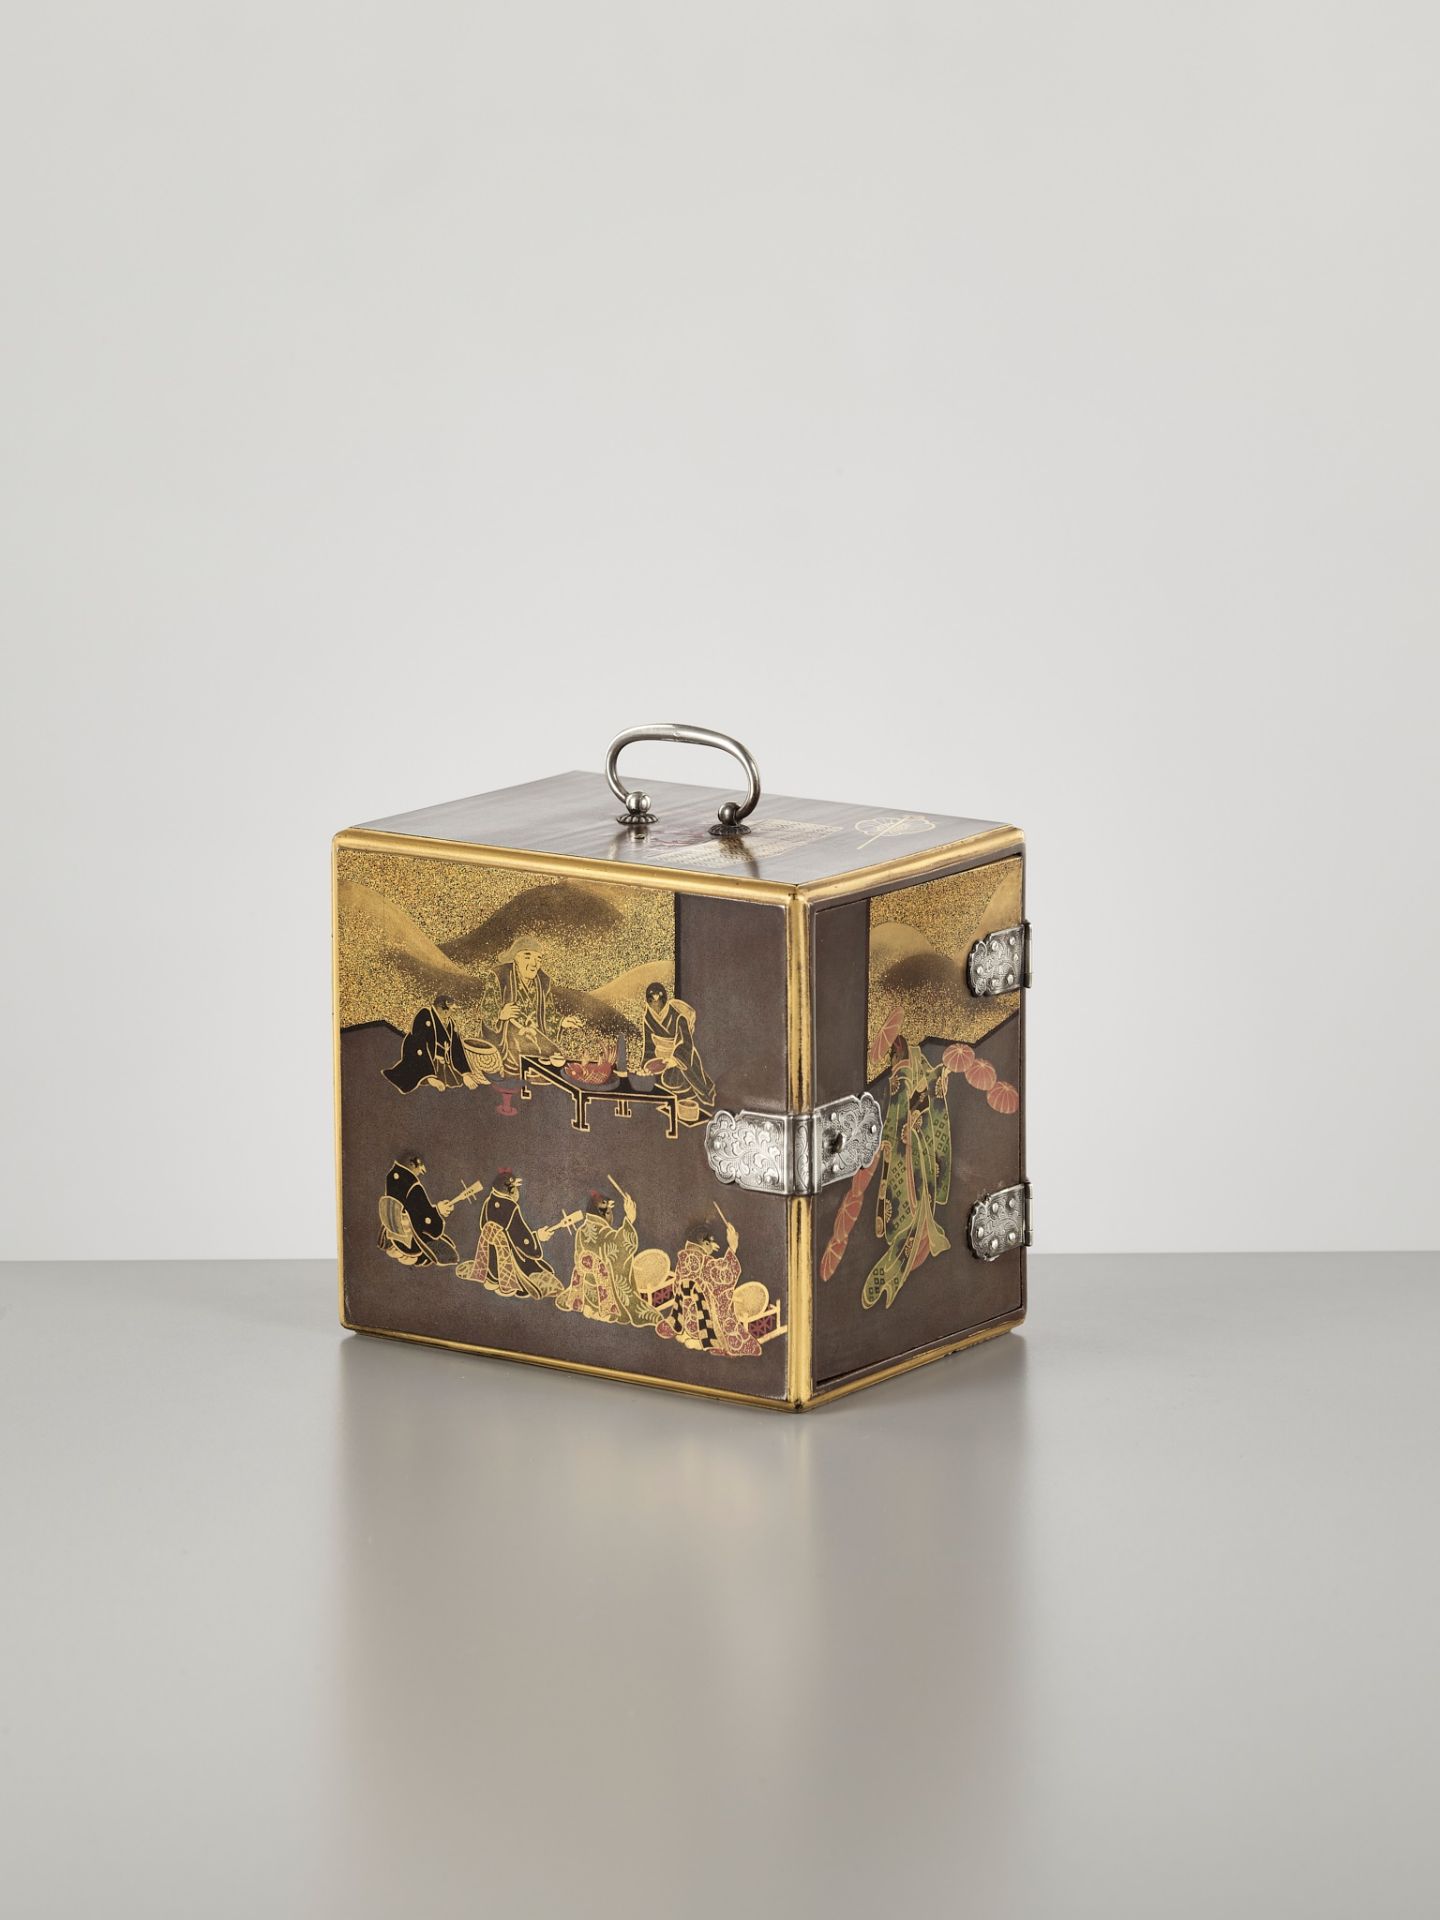 A LACQUER MINIATURE KODANSU (CABINET) WITH SCENES FROM THE TALE OF THE TONGUE-CUT SPARROW - Image 6 of 12